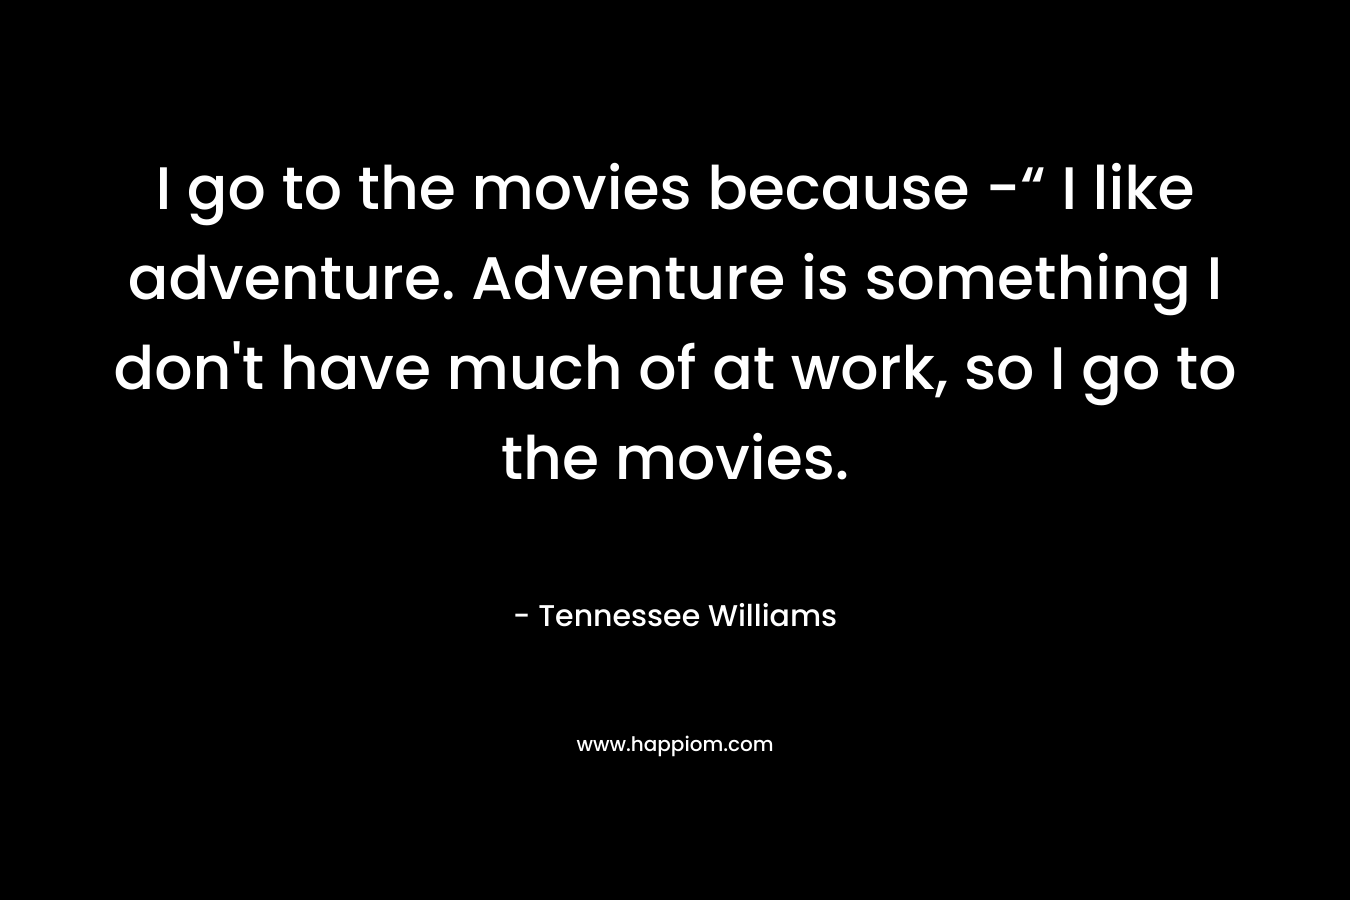 I go to the movies because -“ I like adventure. Adventure is something I don't have much of at work, so I go to the movies.